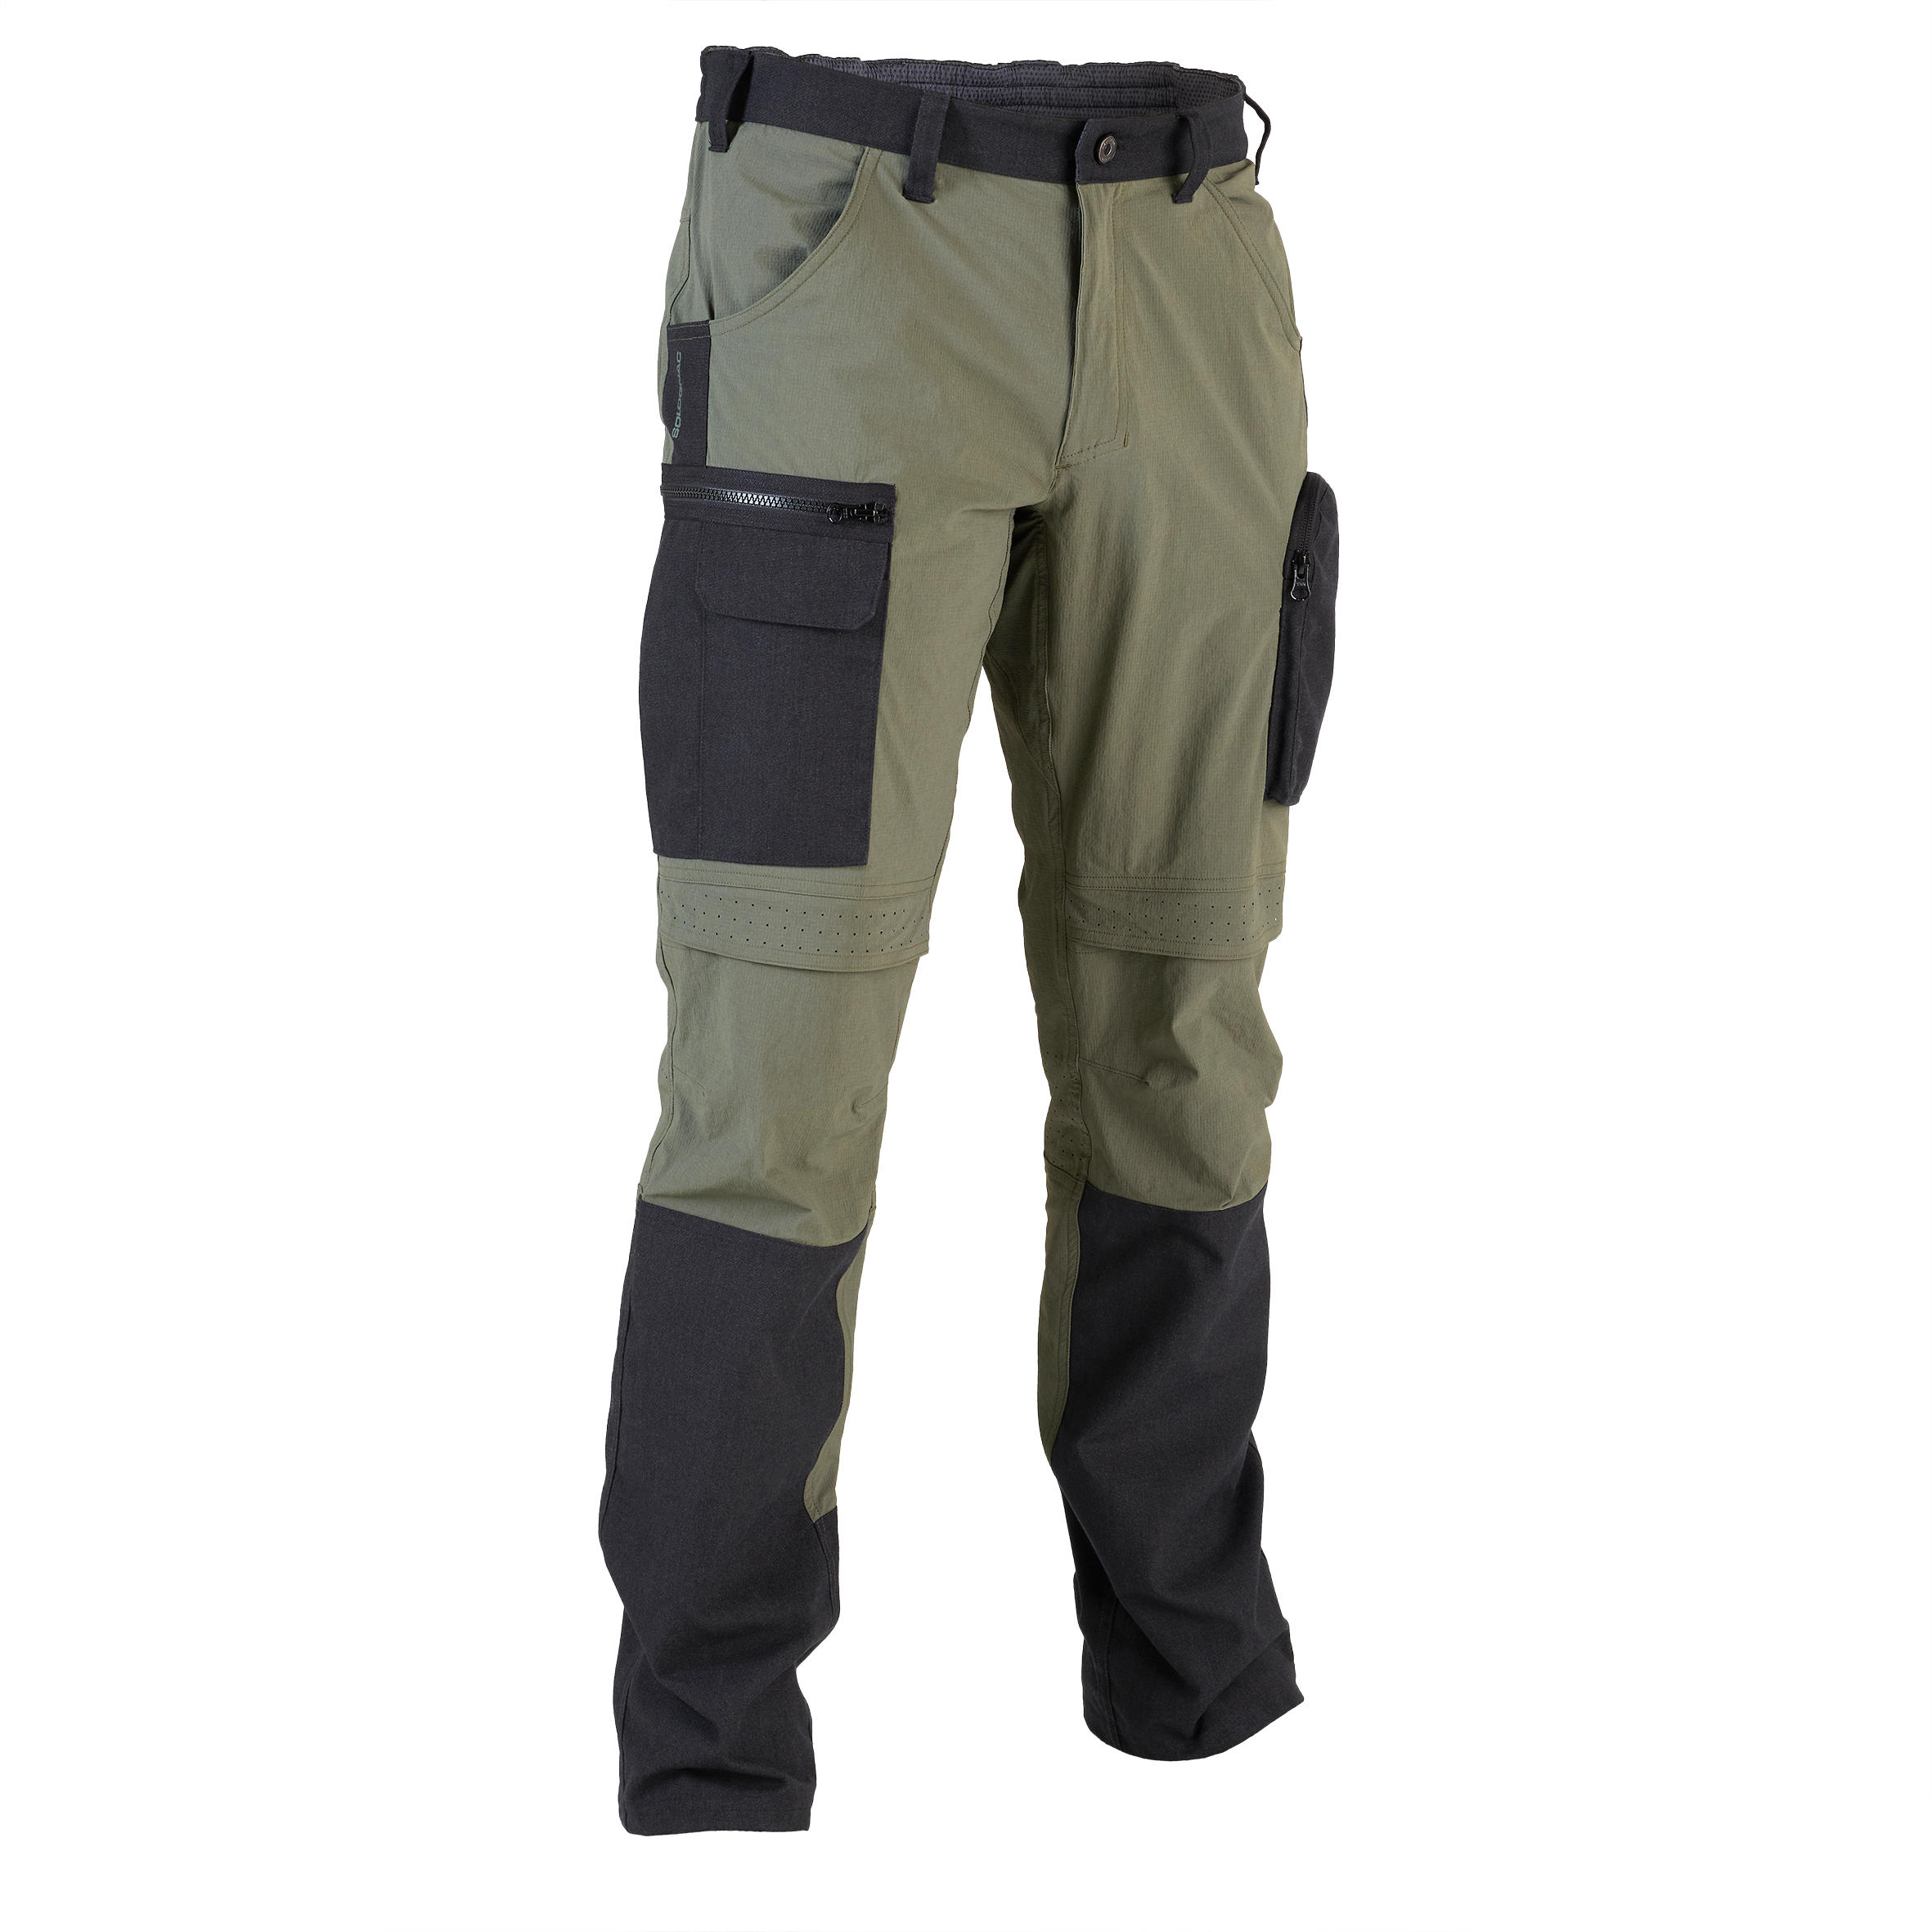 Solognac Men's Hunting Pants 520 in Khaki, Size Small | Hunting pants,  Trousers details, Pants